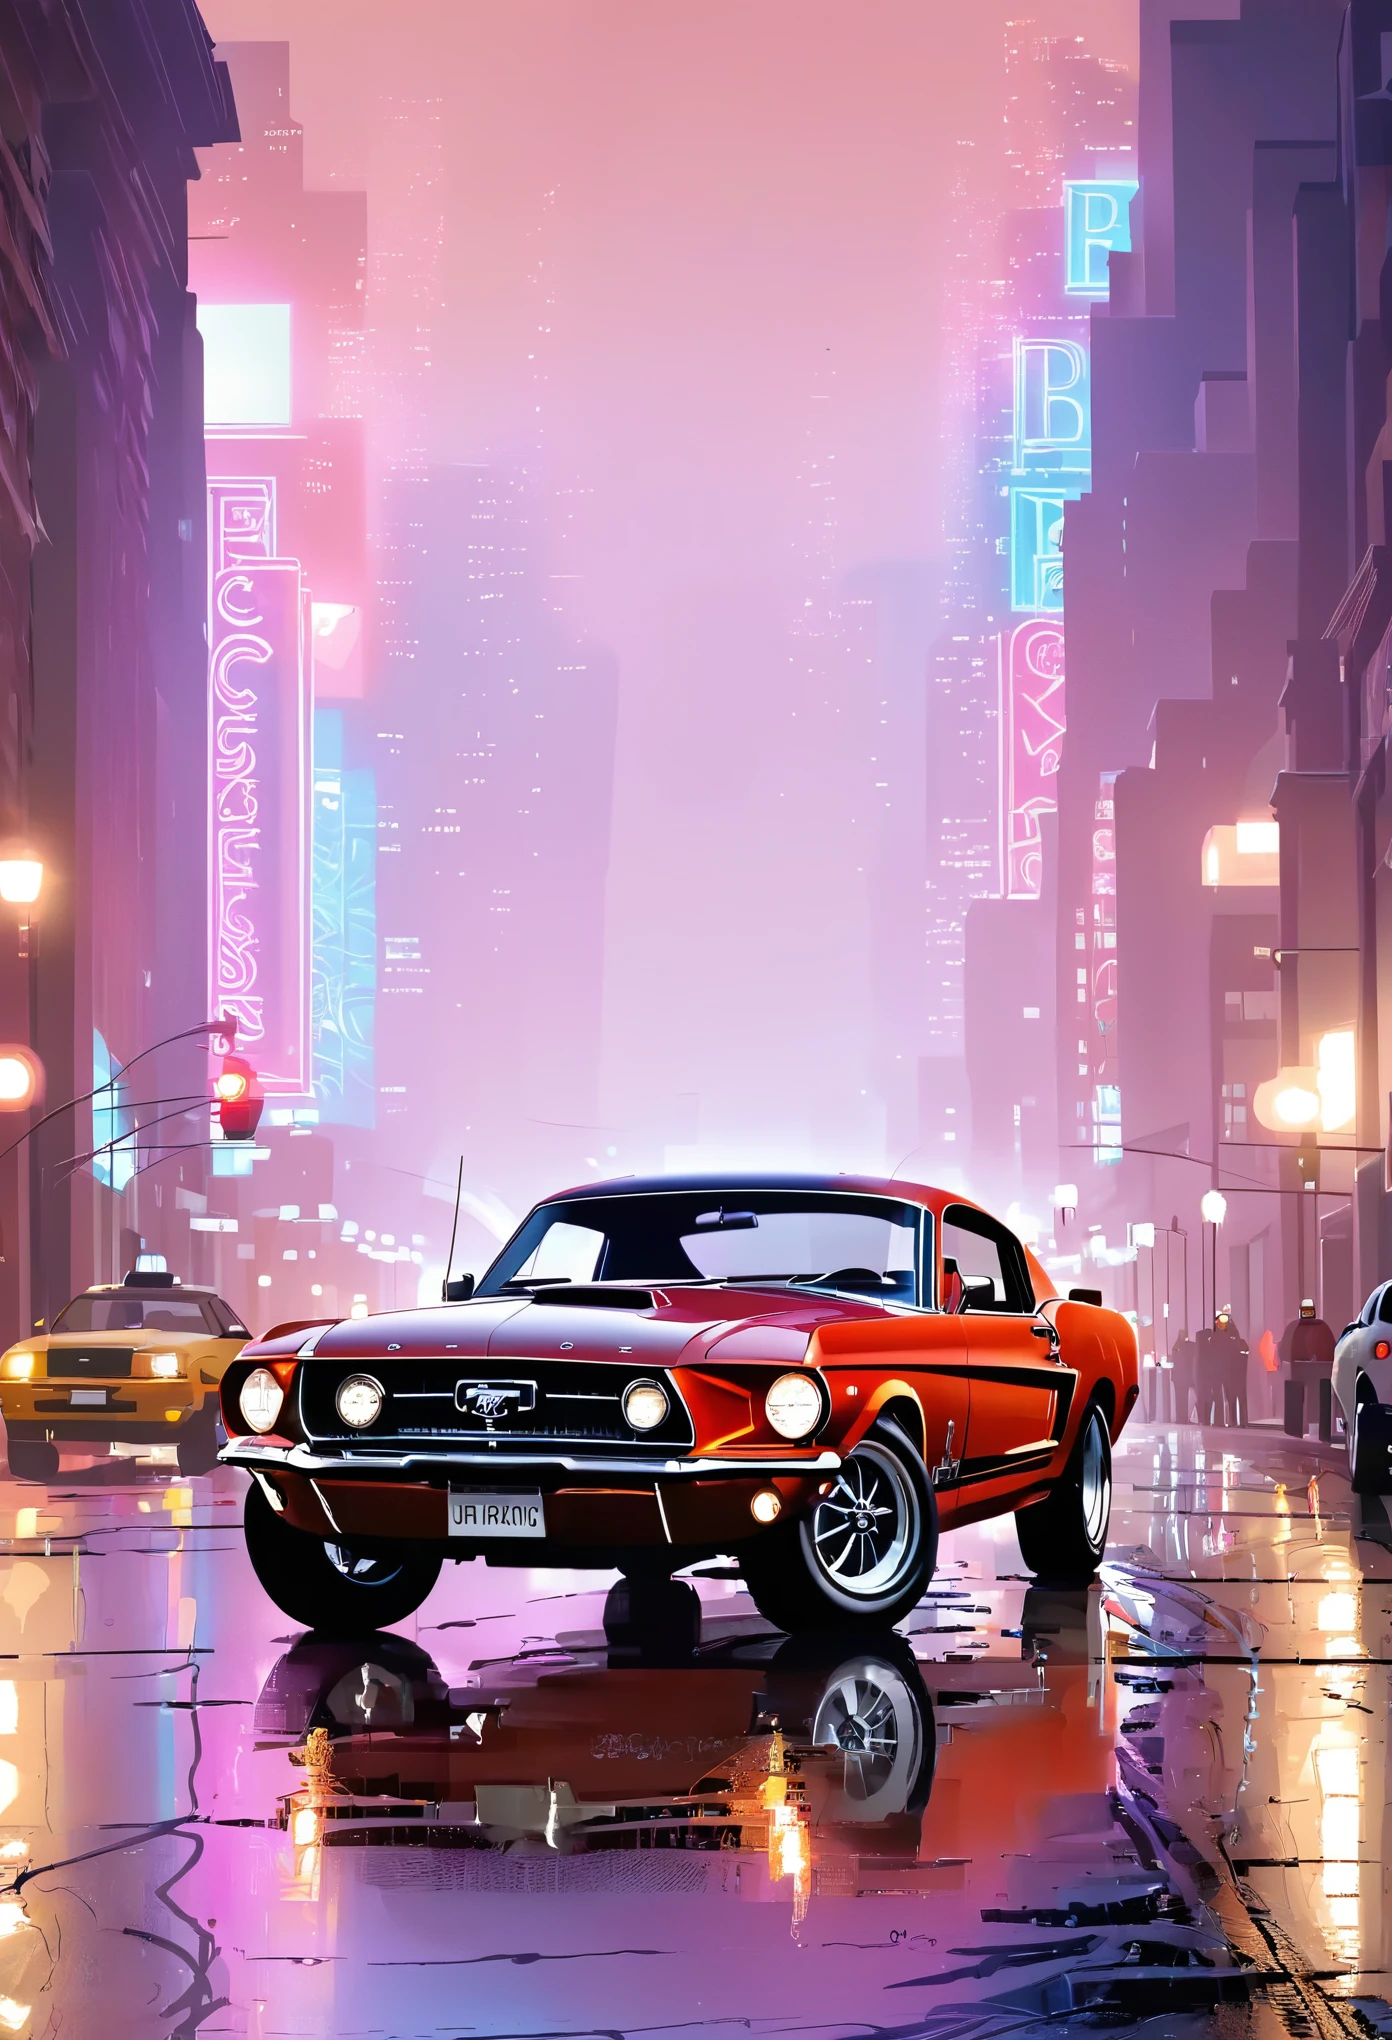 Illustration: FORD BOSS 429 mustang, Luz Volumetrica Estilo GTA. In this captivating illustration, we are transported to a realm where the essence of a classic vintage automobile is transformed into a breathtaking piece of art. The Auto Clasico Vintage stands boldly, radiating an aura of nostalgia and elegance. Its sleek body, crafted with utmost attention to detail, showcases a harmonious fusion of past and present. The scene is illuminated by a mesmerizing volumetric light, reminiscent of the iconic atmosphere found in the renowned GTA video game series. The soft glow envelops the vintage vehicle, accentuating its timeless charm and emphasizing every delicate curve and contour. As our eyes delve deeper into the image, we cannot help but be captivated by